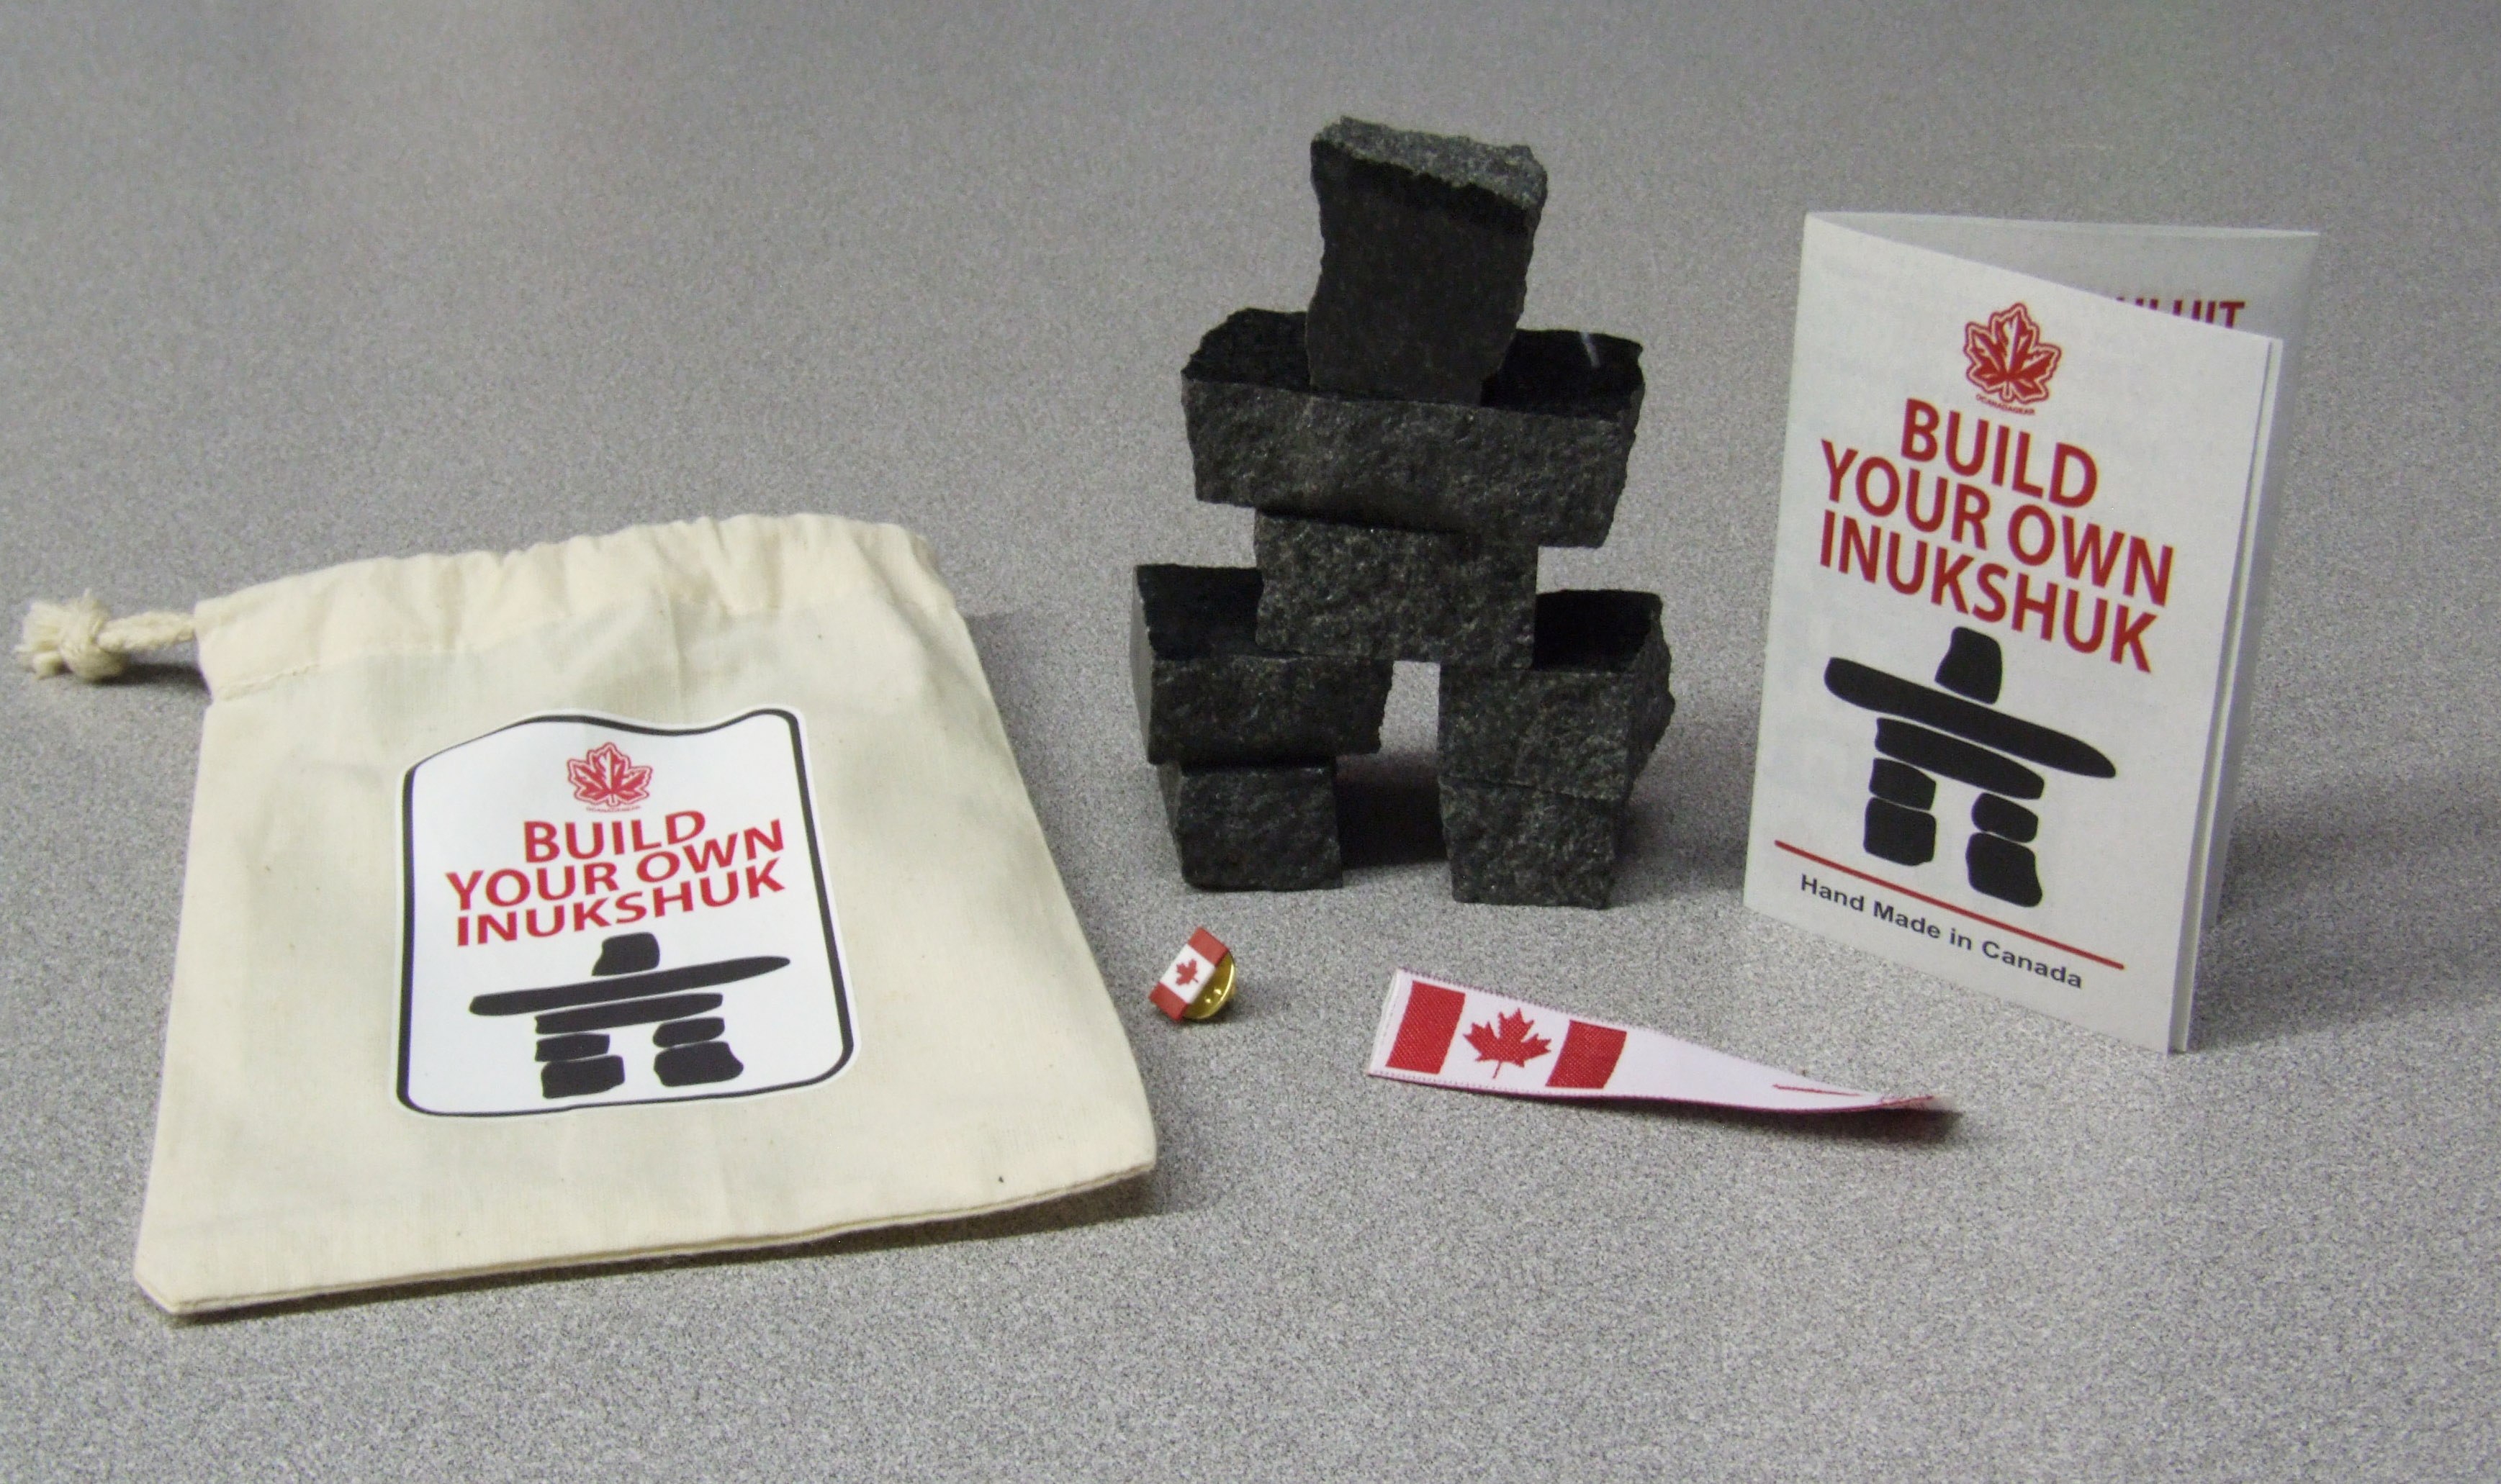 Build your own Canada Inukshuk